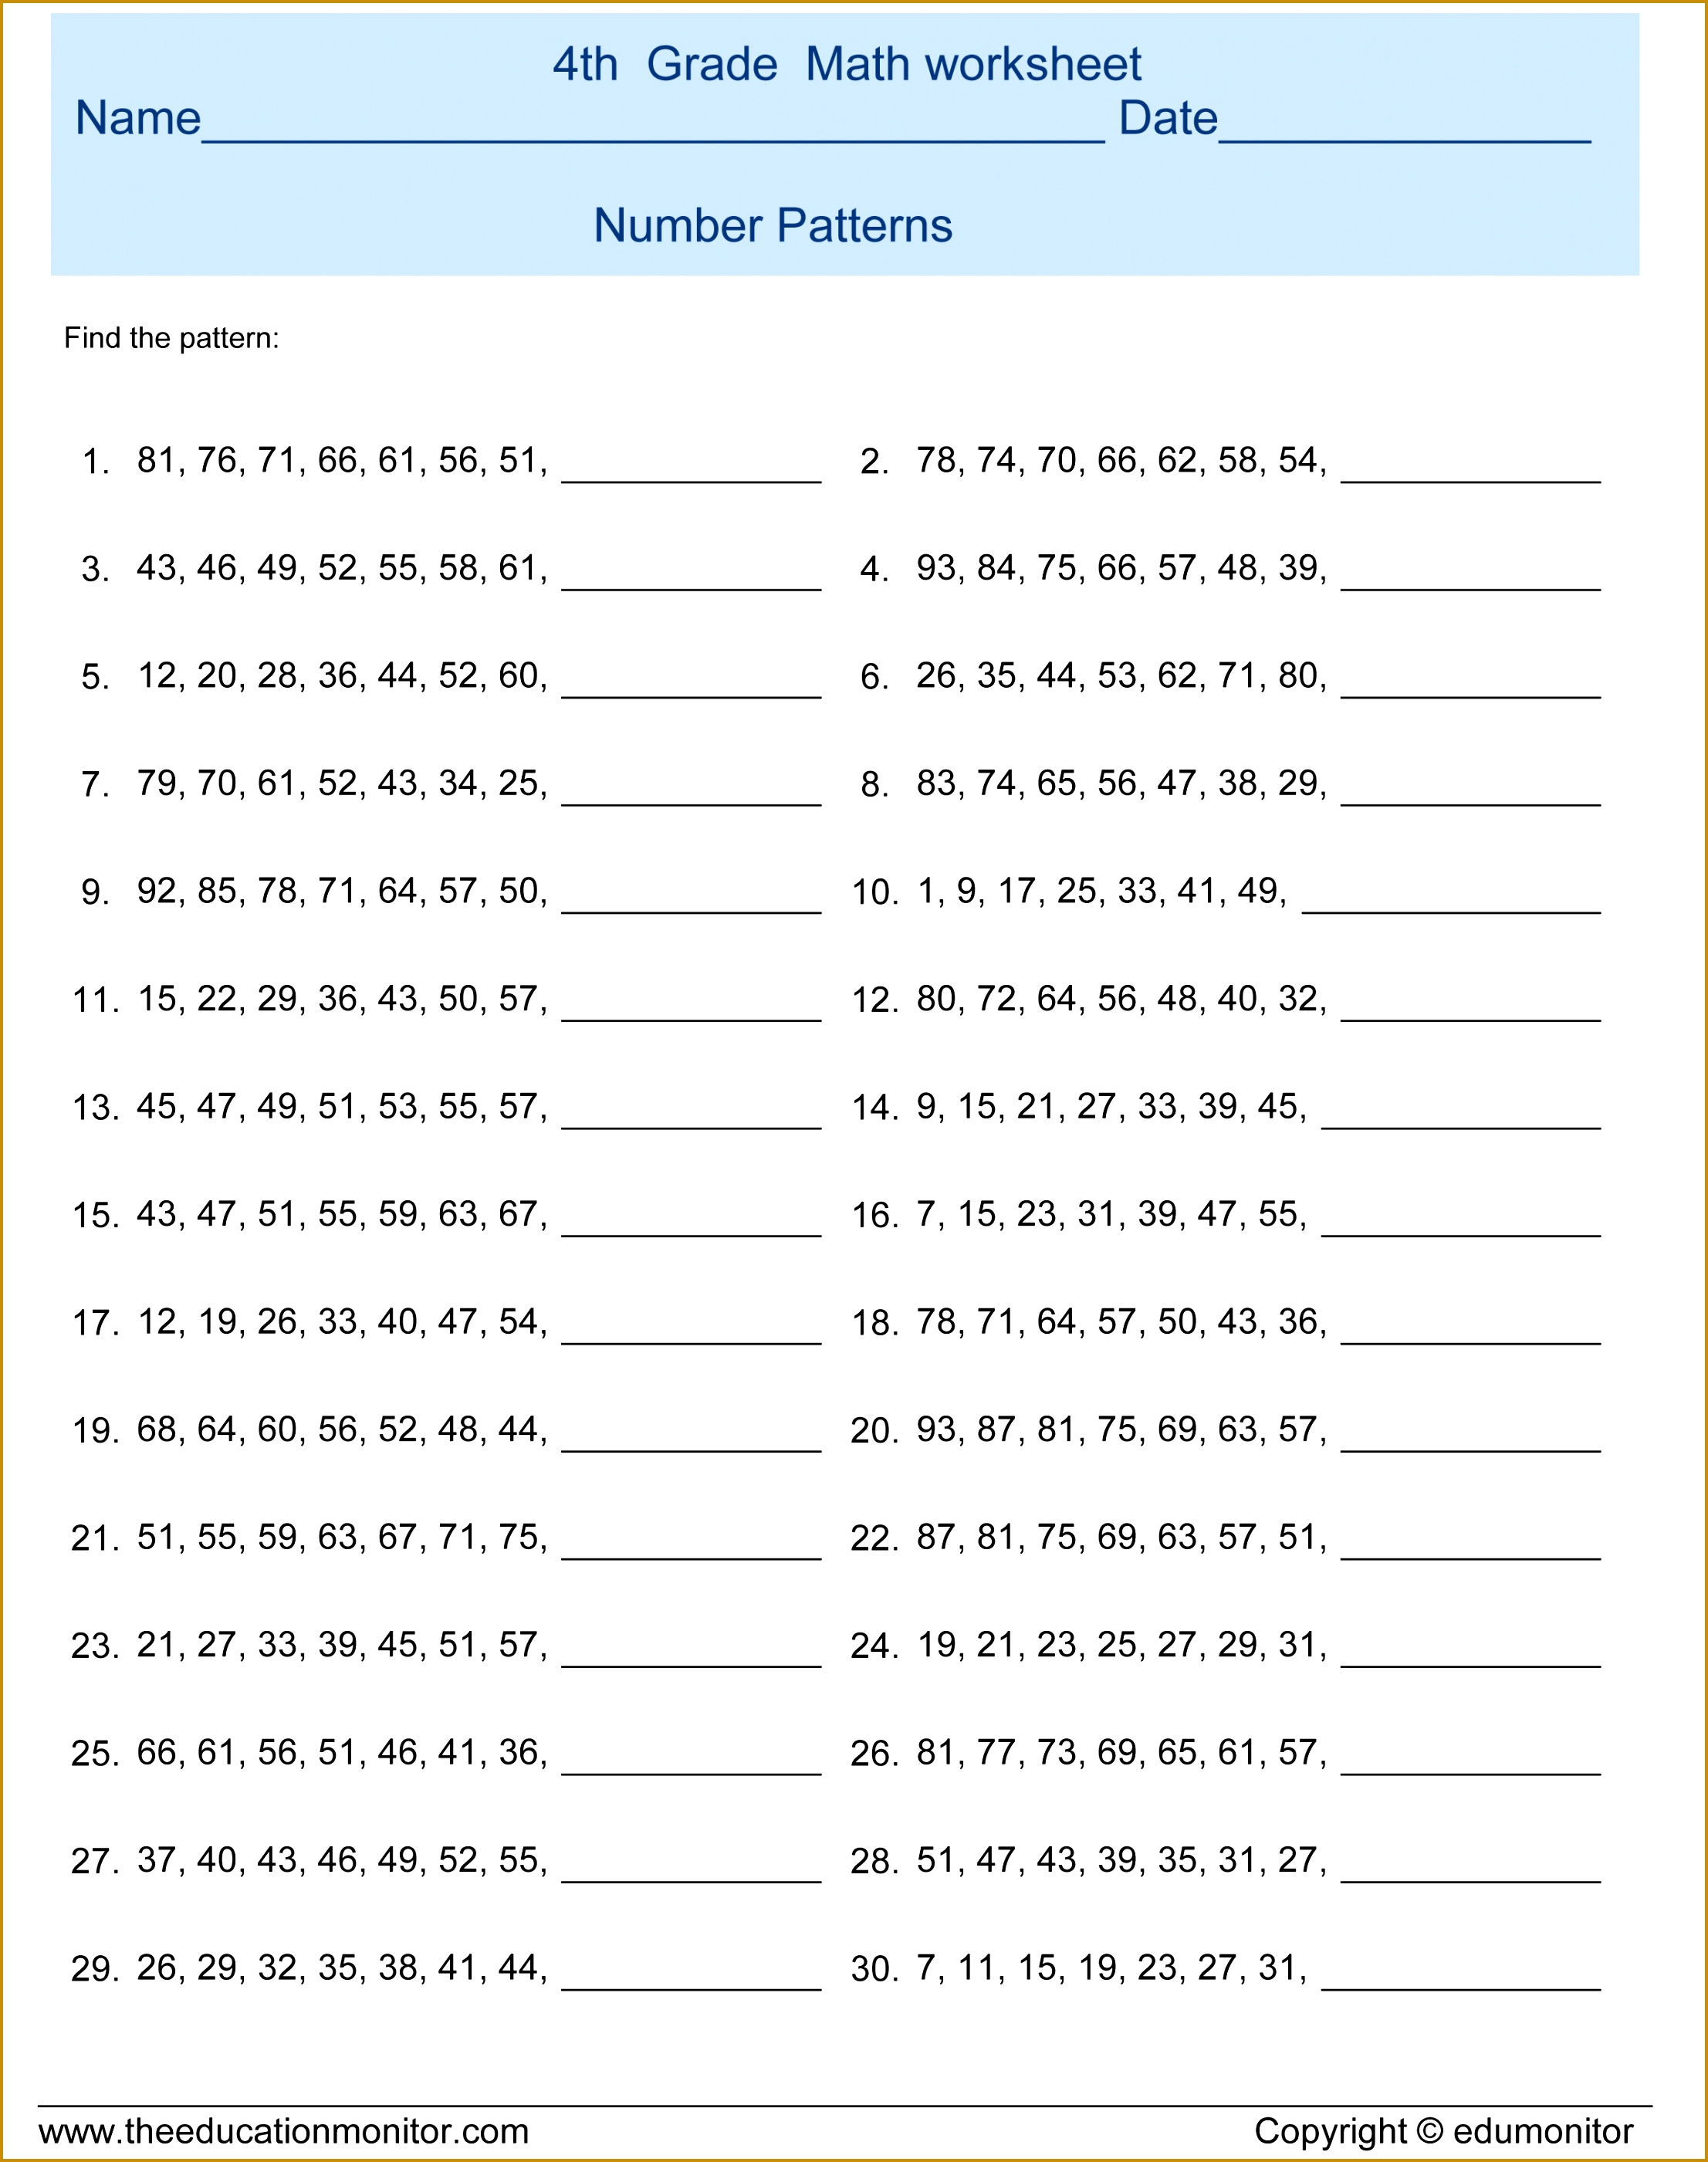 Printable Worksheets For 4th Grade Math Free Printable Worksheets For 4th Grade 28012213